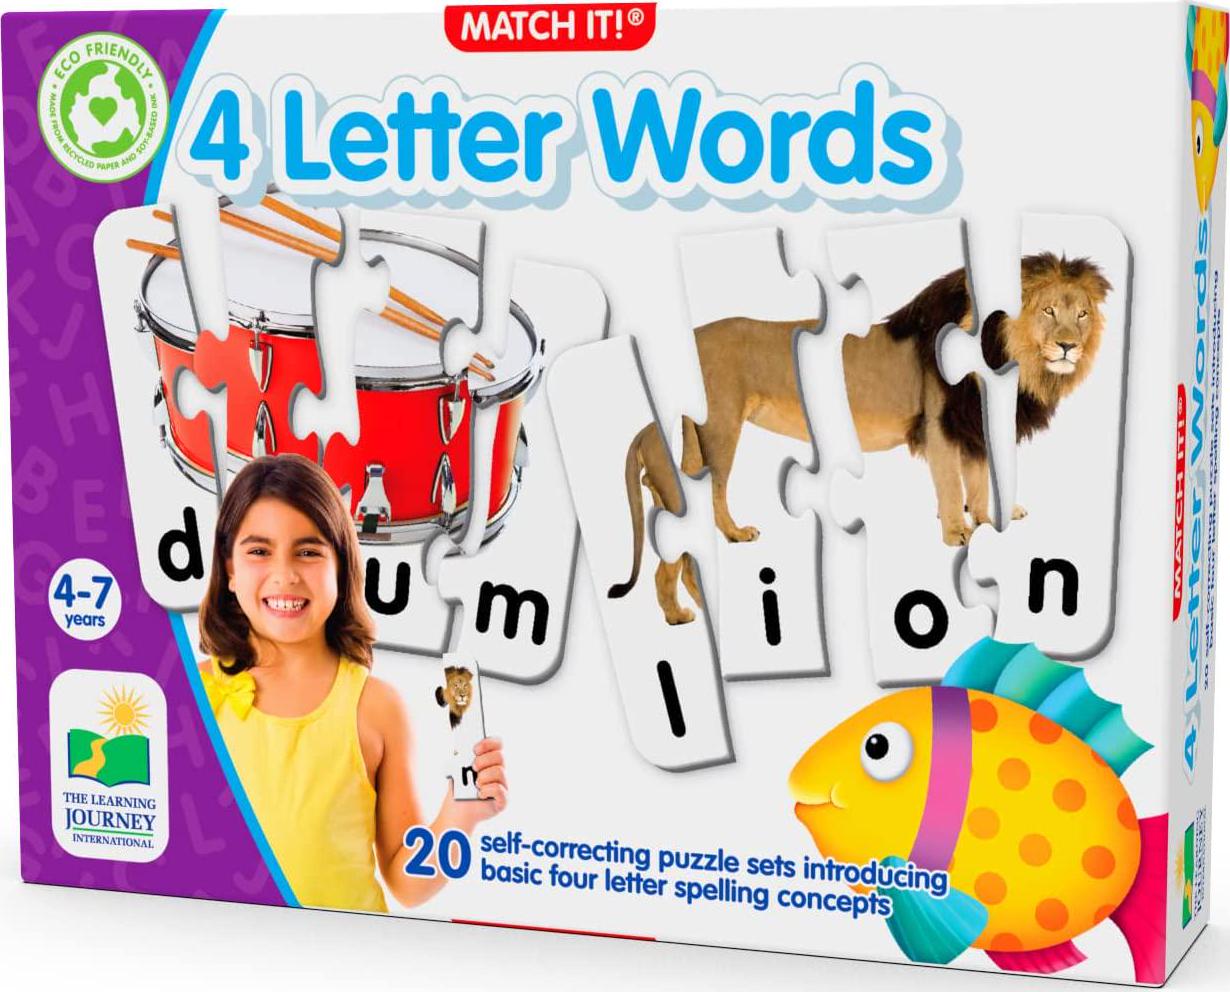 Learning Journey International LLC, Learning Journey International Match It! - 4 Letter Words - 20 Self-Correcting Reading and Spelling Puzzles with Matching Images, Multicolor